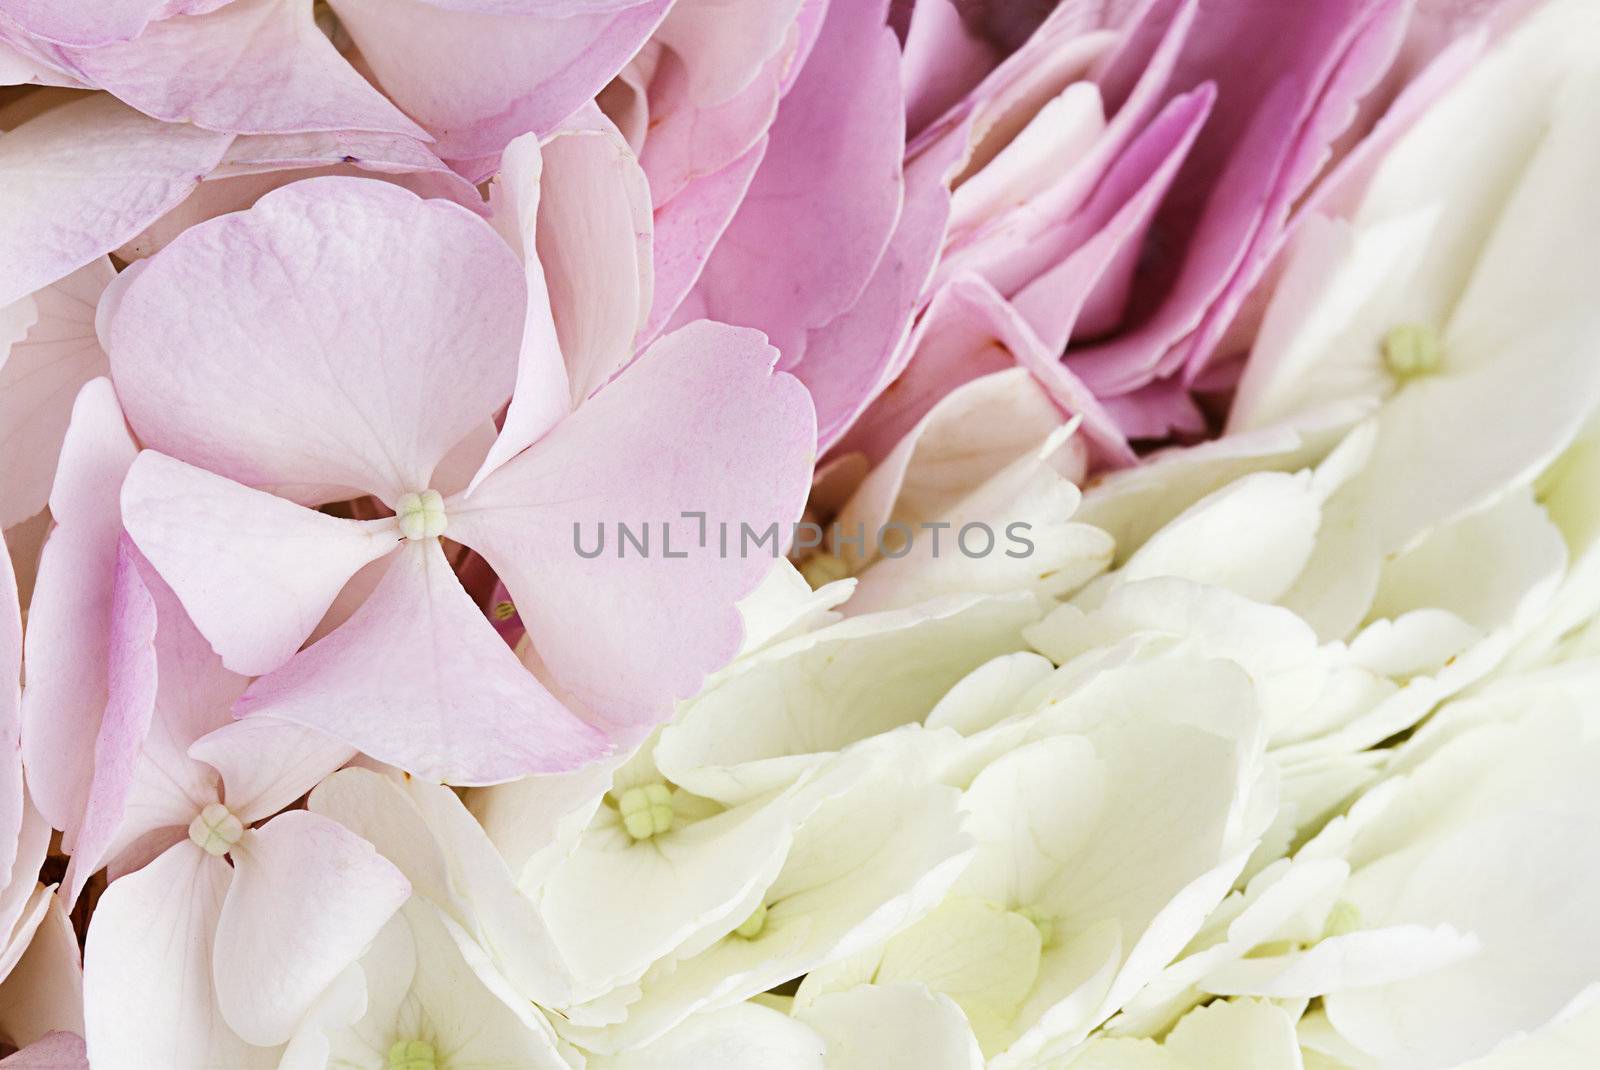 Abstract background of pretty pastel colored Hydrangeas with shallow depth of field. Some blur on lower portion of image. 